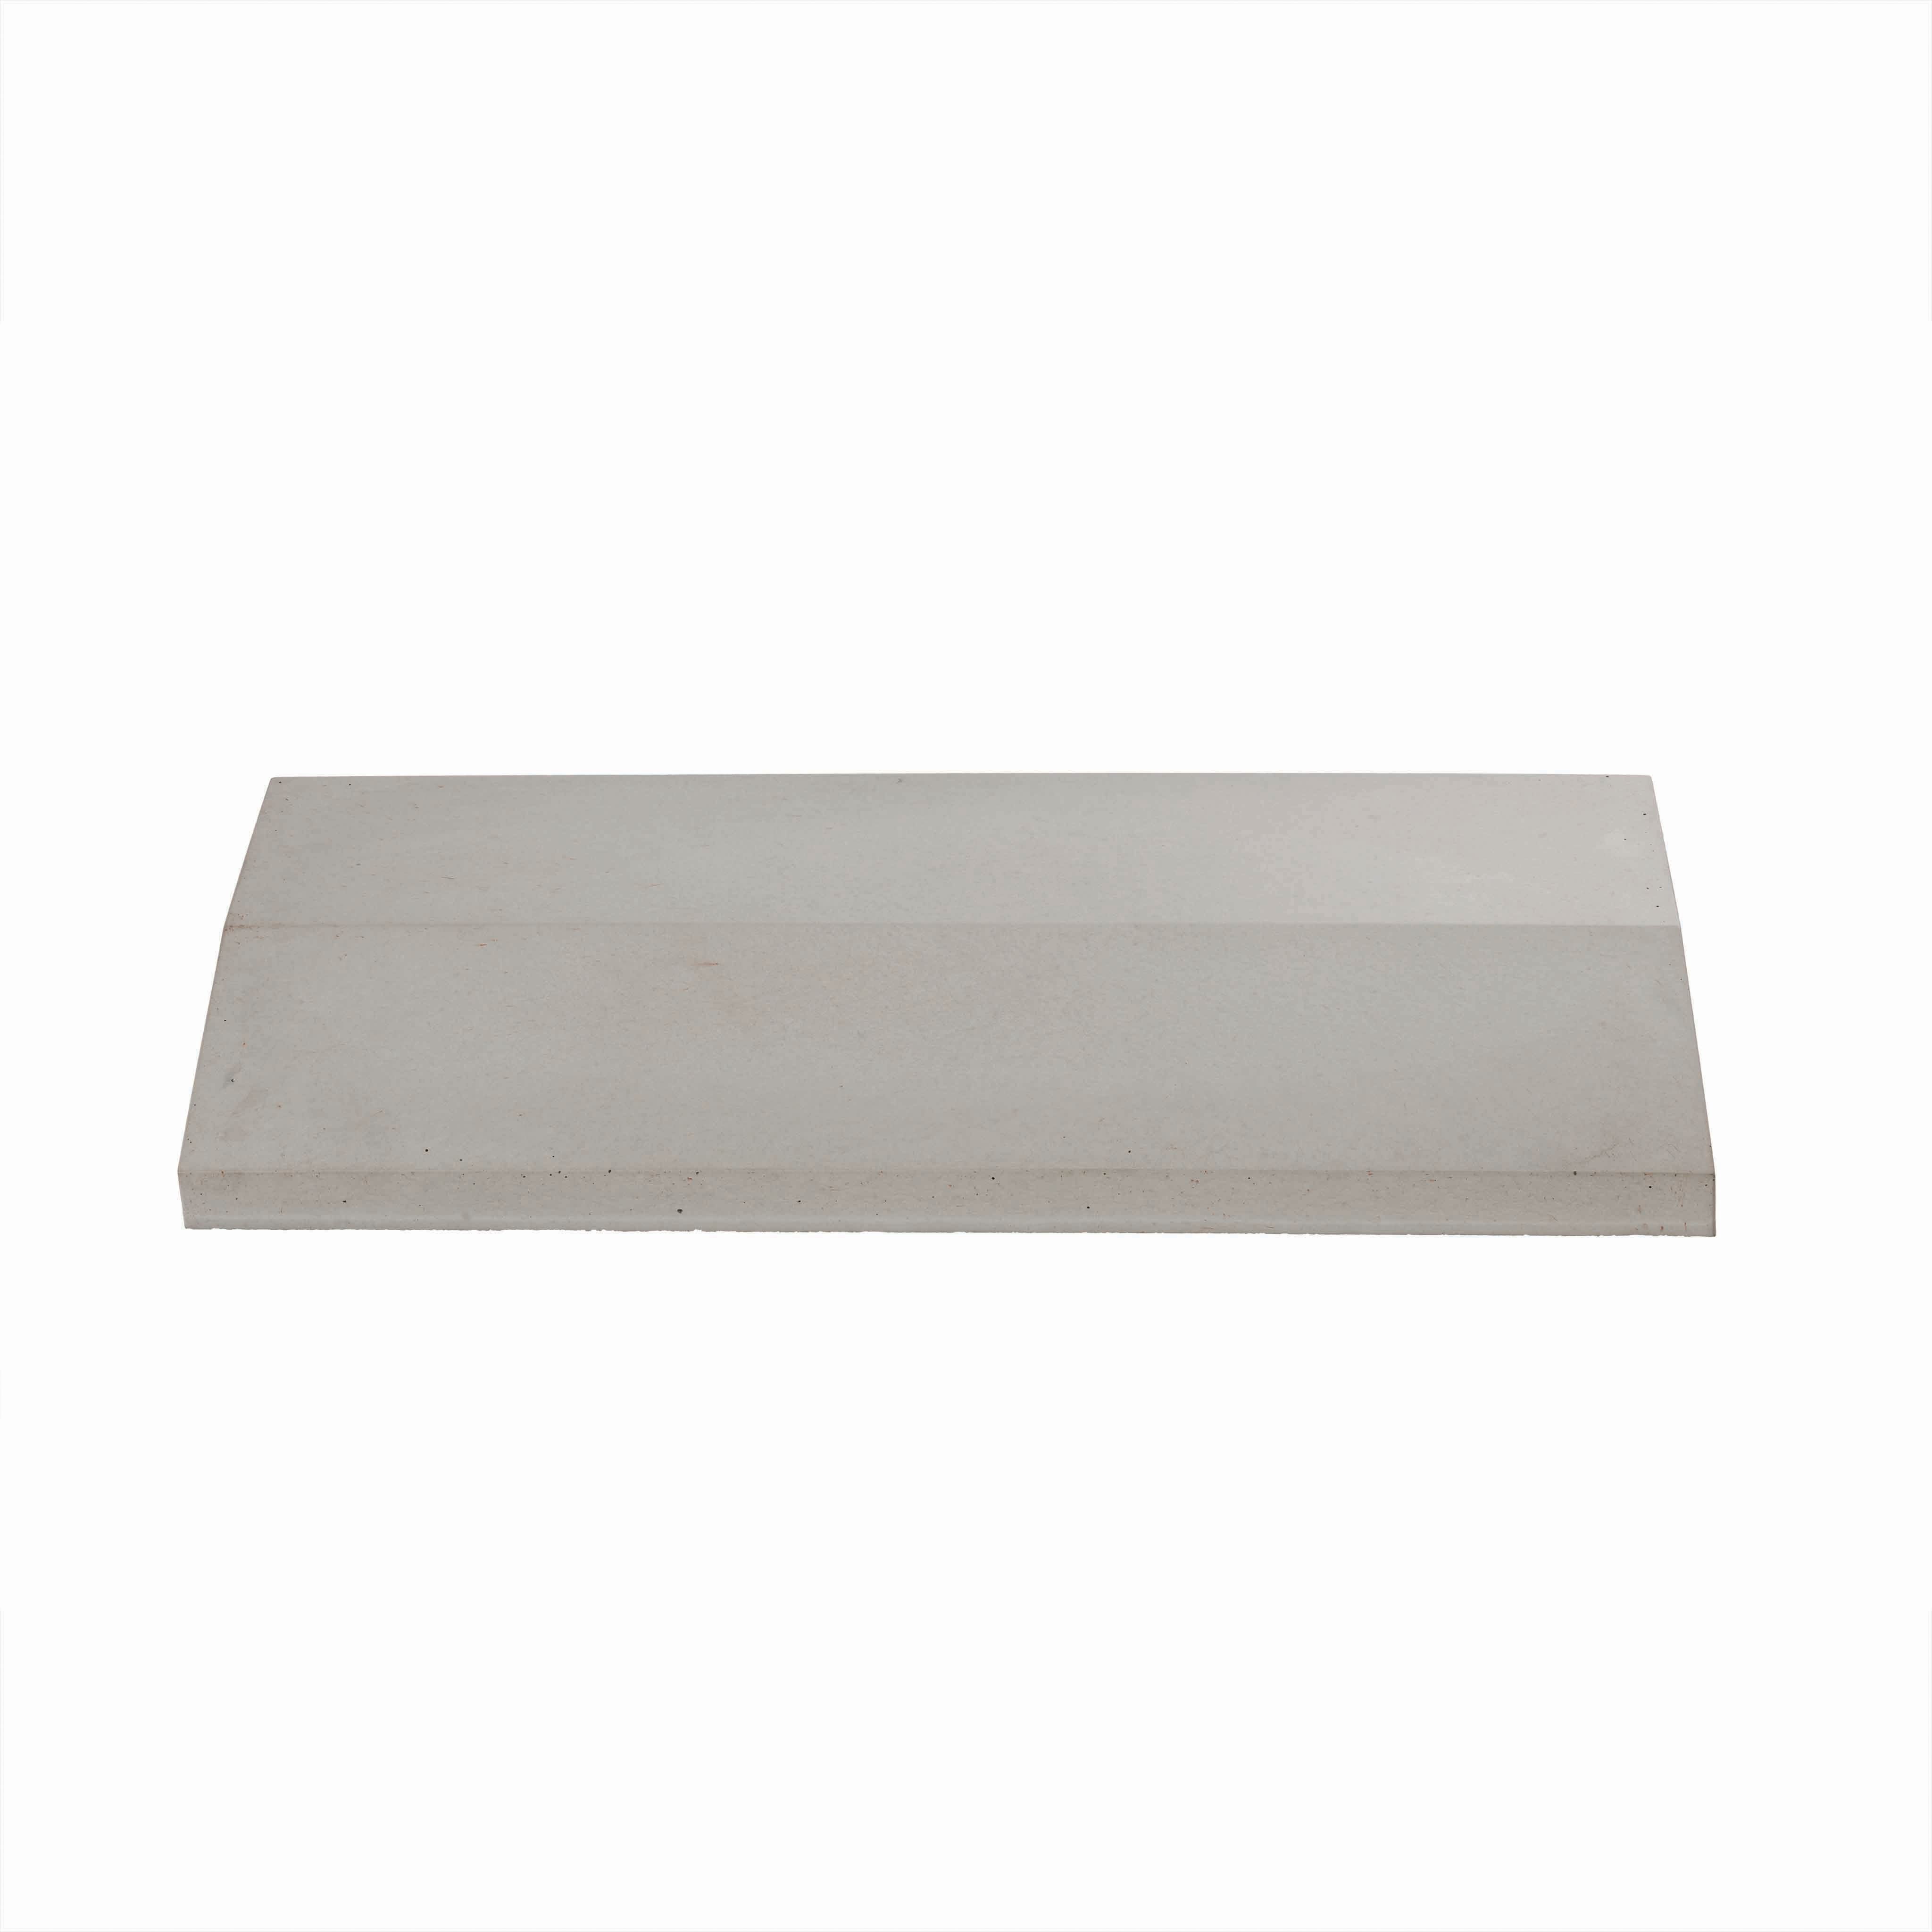 Image of Marshalls Smooth Cast Coping Stone - Grey 280 x 600 x 50mm